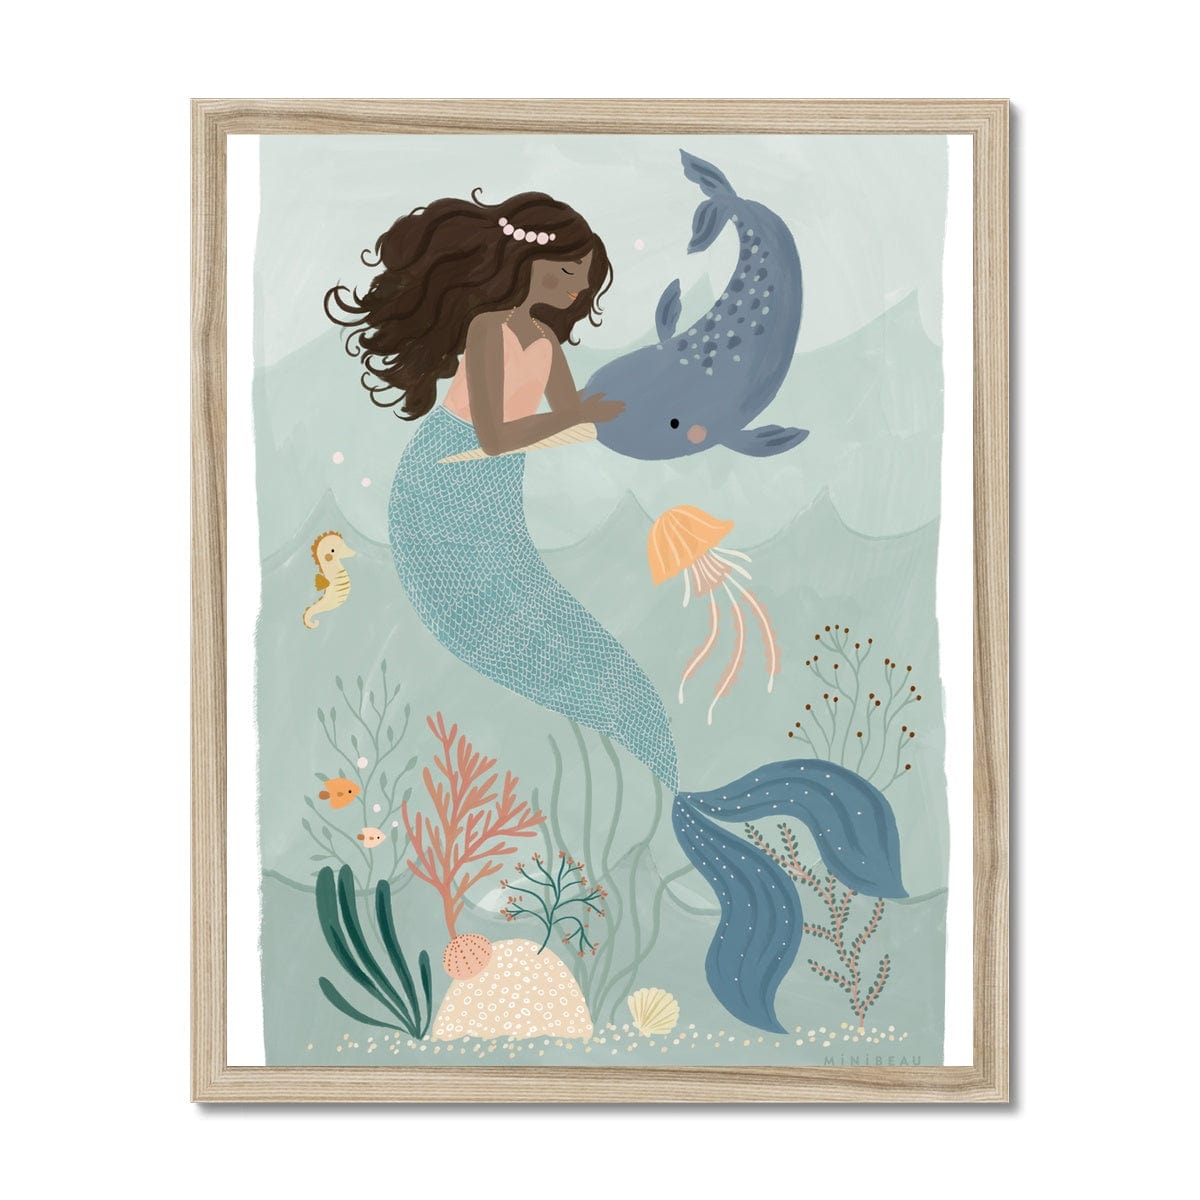 Picture of a hand-painted picture depicting Pearl the Mermaid petting a Narwhal at the bottom of the sea. Coral has dark hair and wears an orange top and her tail is a deep teal. She is wearing a pearl headband. In the background are 2 small angel fish, a sea horse and a jellyfish amongst sea foliage with a white border in a natural wood frame